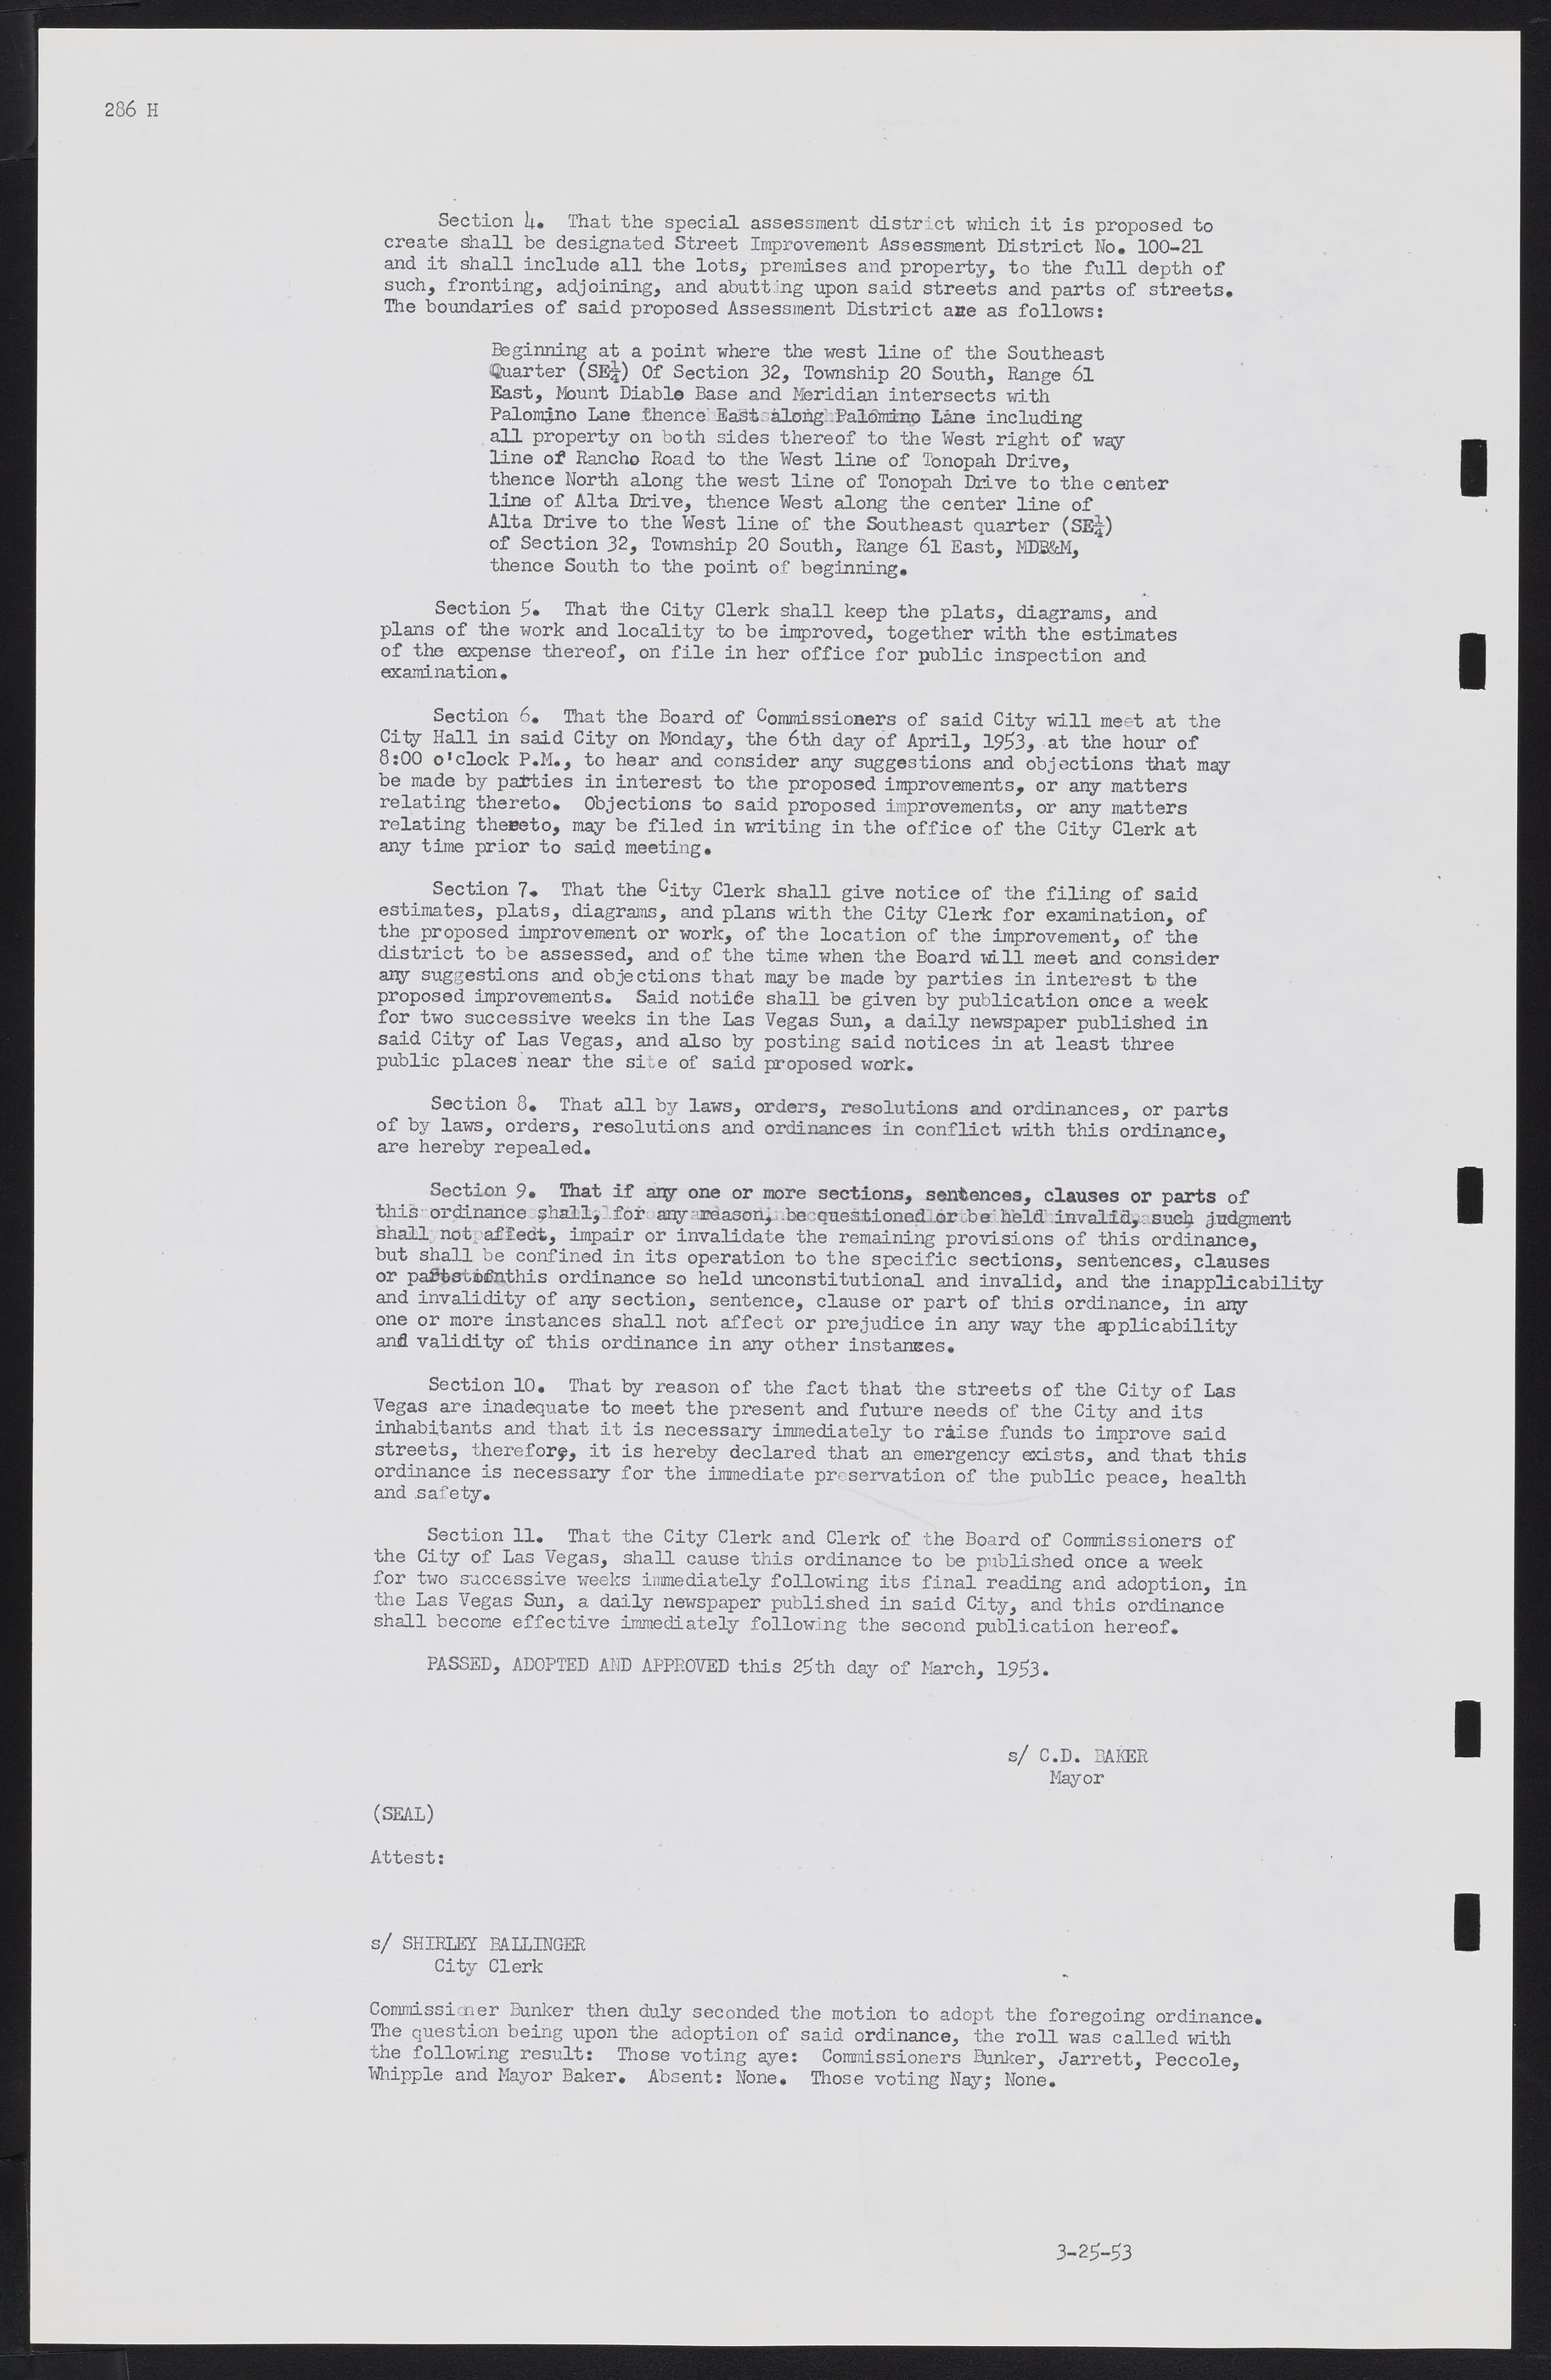 Las Vegas City Commission Minutes, May 26, 1952 to February 17, 1954, lvc000008-310